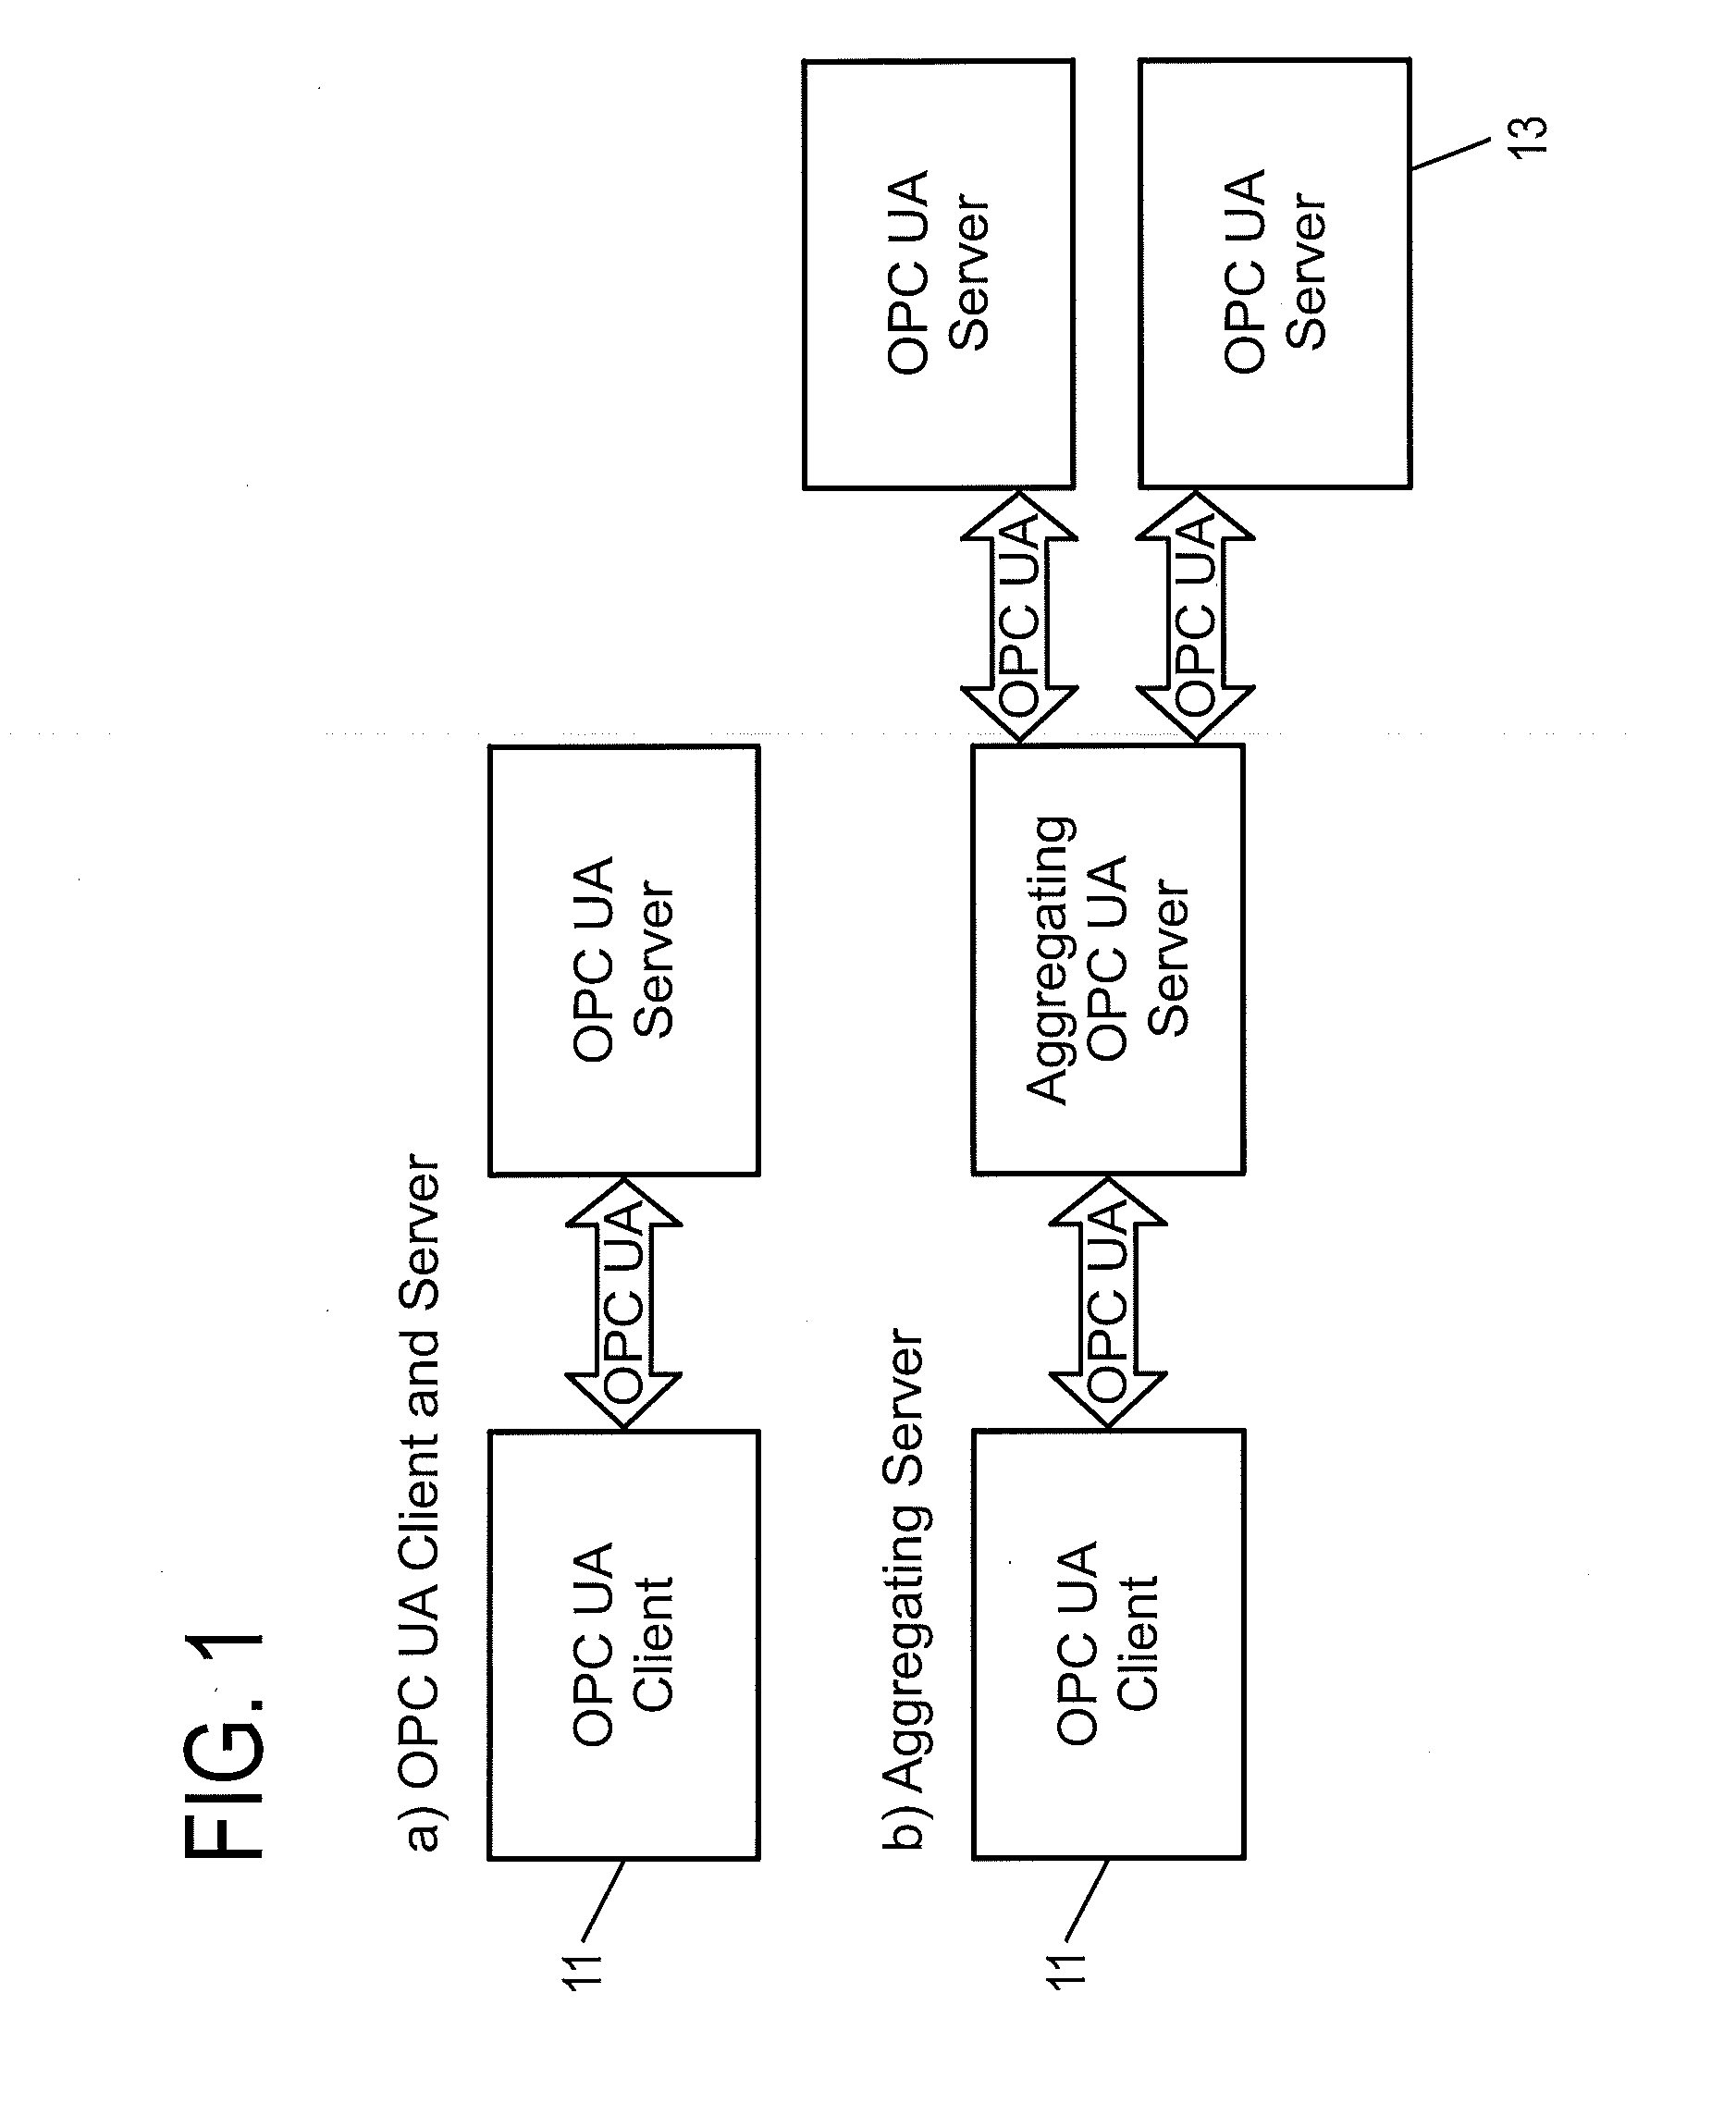 Client/server system for communicating according to the standard protocol opc ua and having single sign-on mechanisms for authenticating, and method for performing single sign-on in such a system